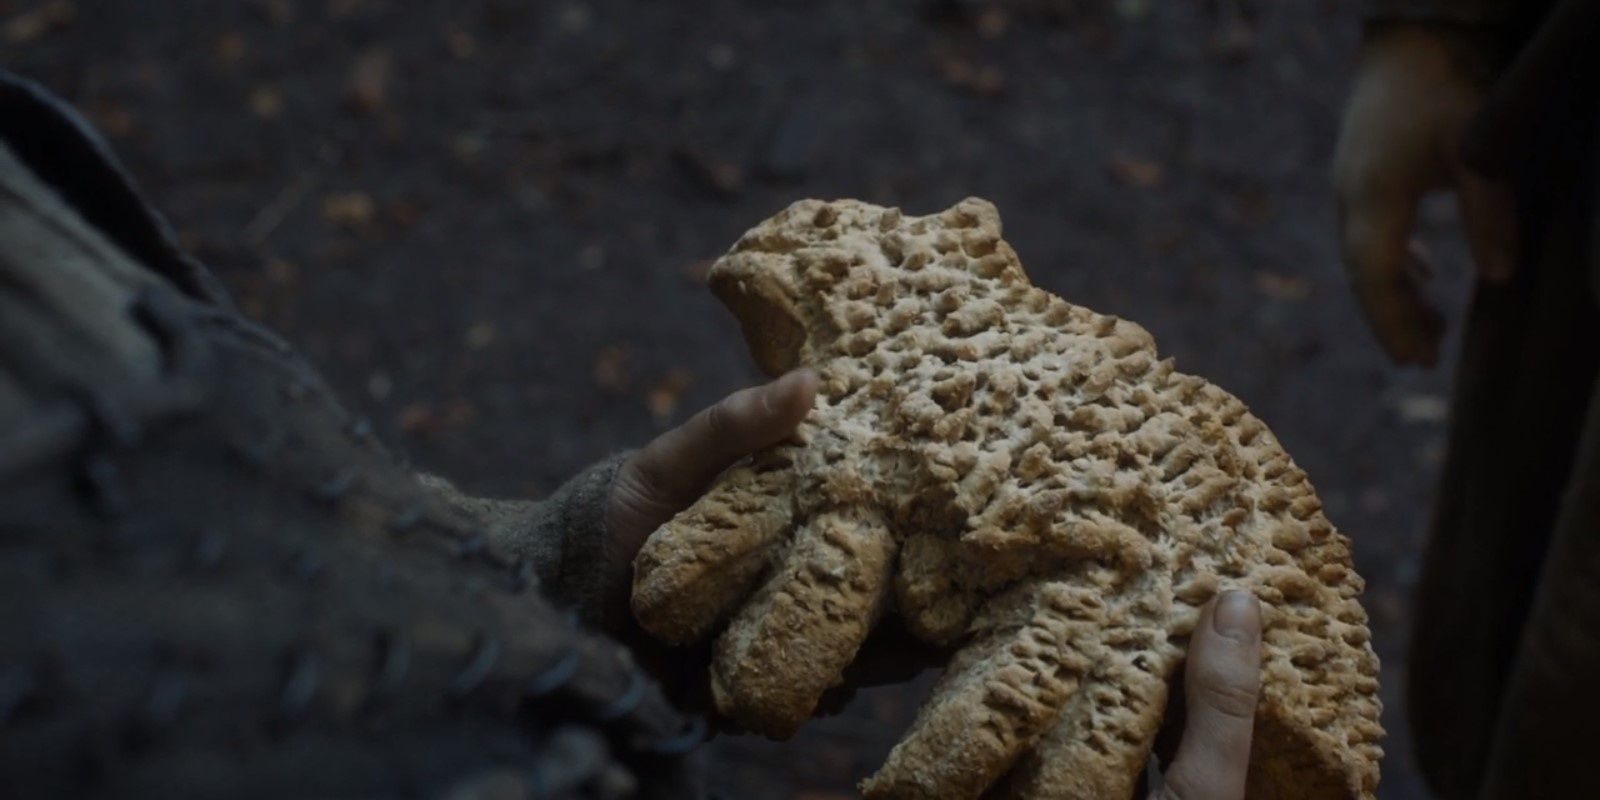 Game Of Thrones 15 Most Heartwarming Scenes Of The Entire Show